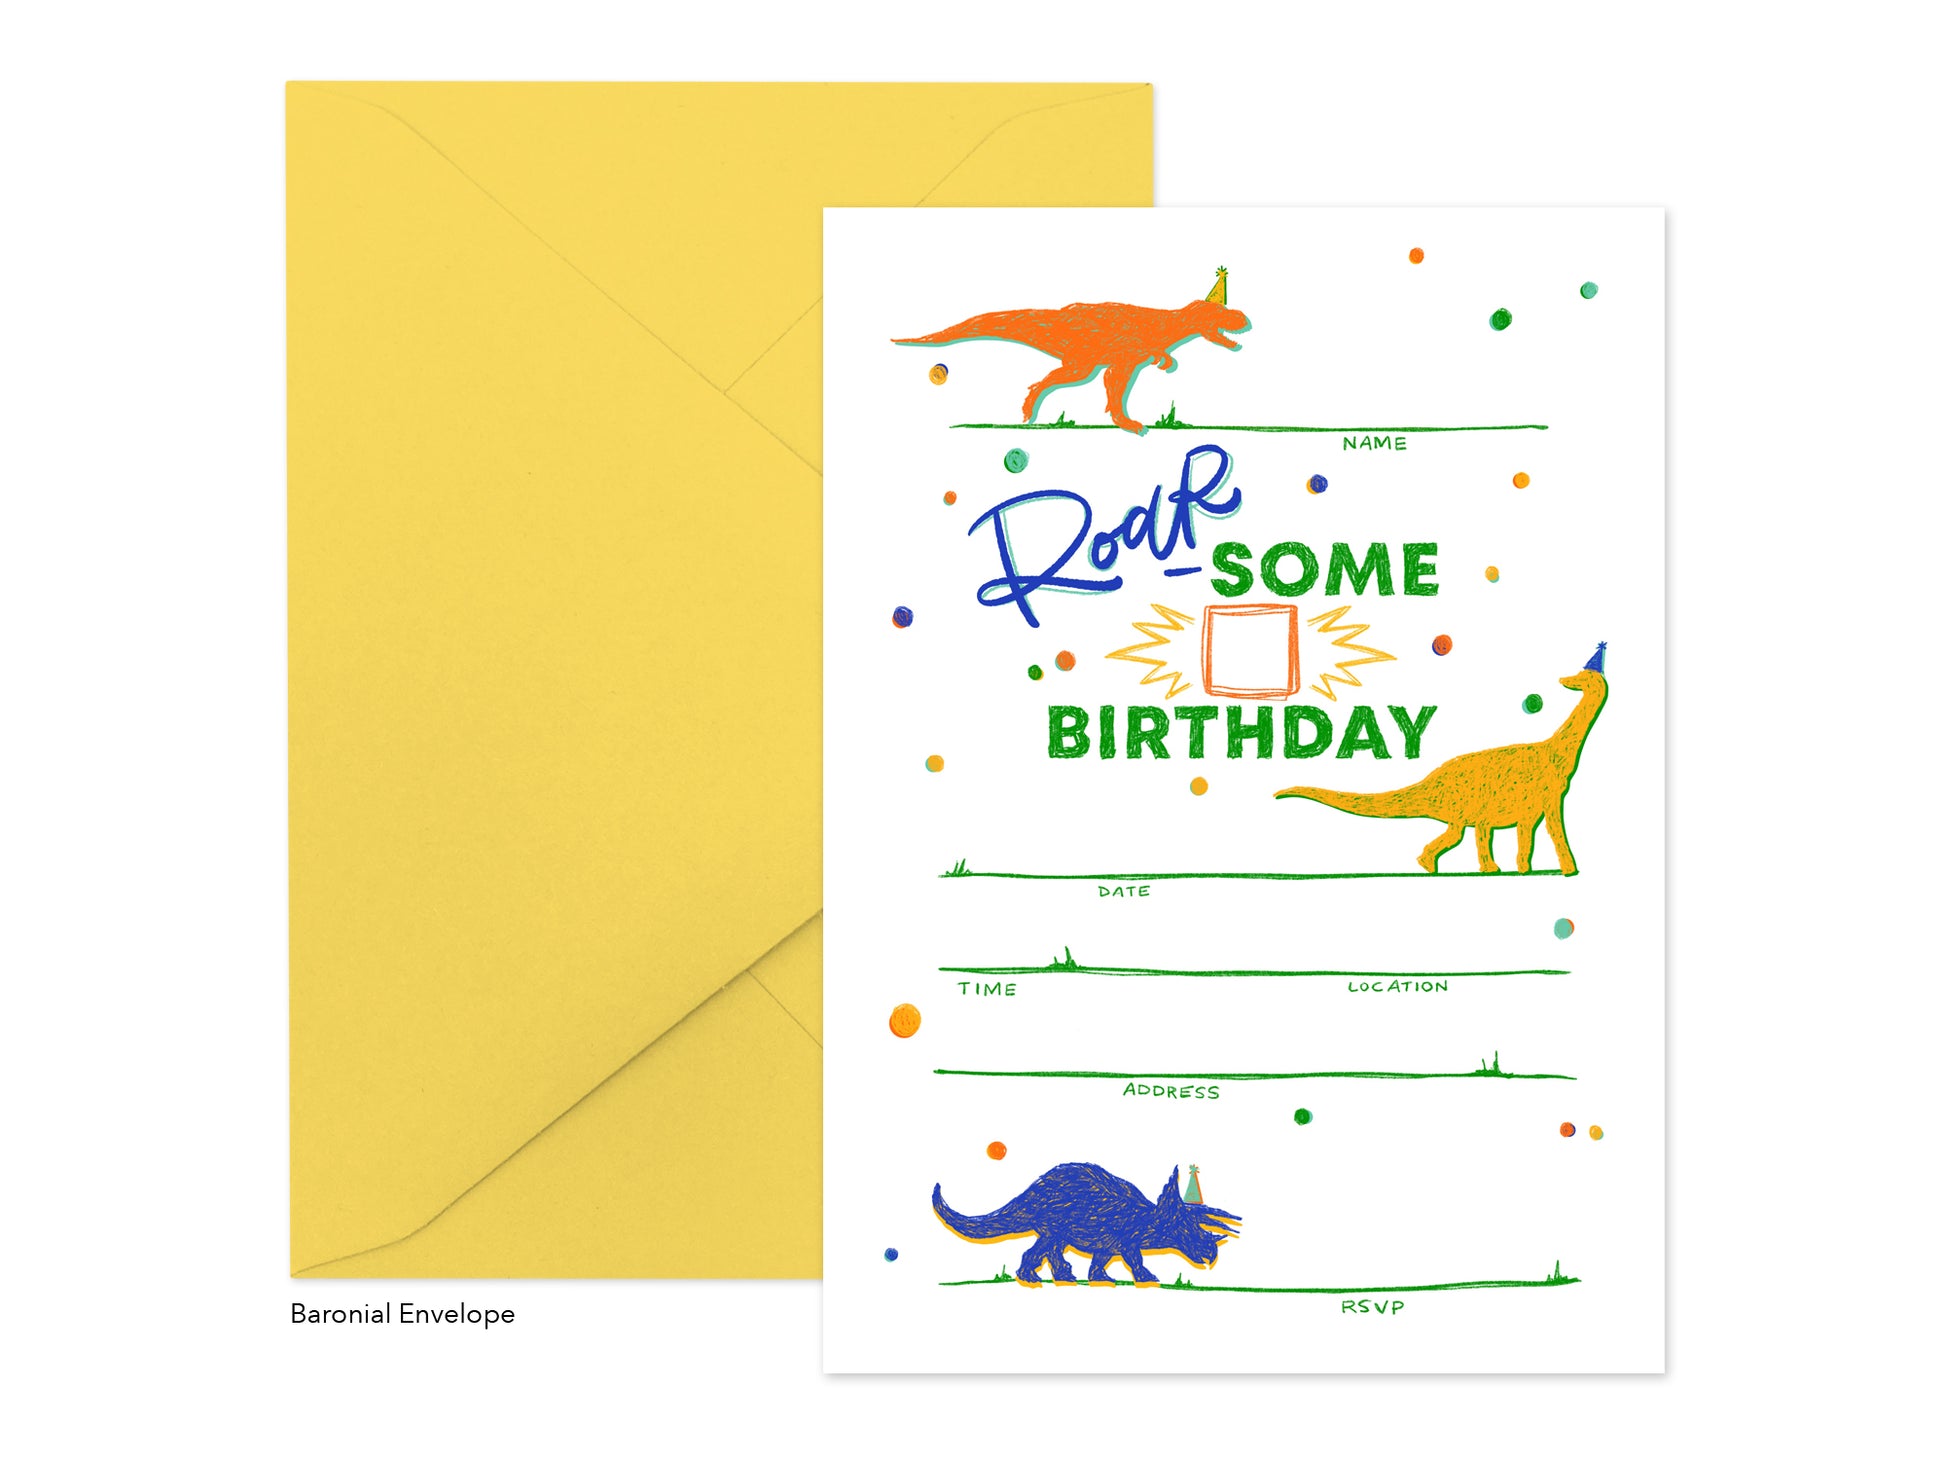 Dinosaur Theme Party Fill-In Invitations - Set of 10.